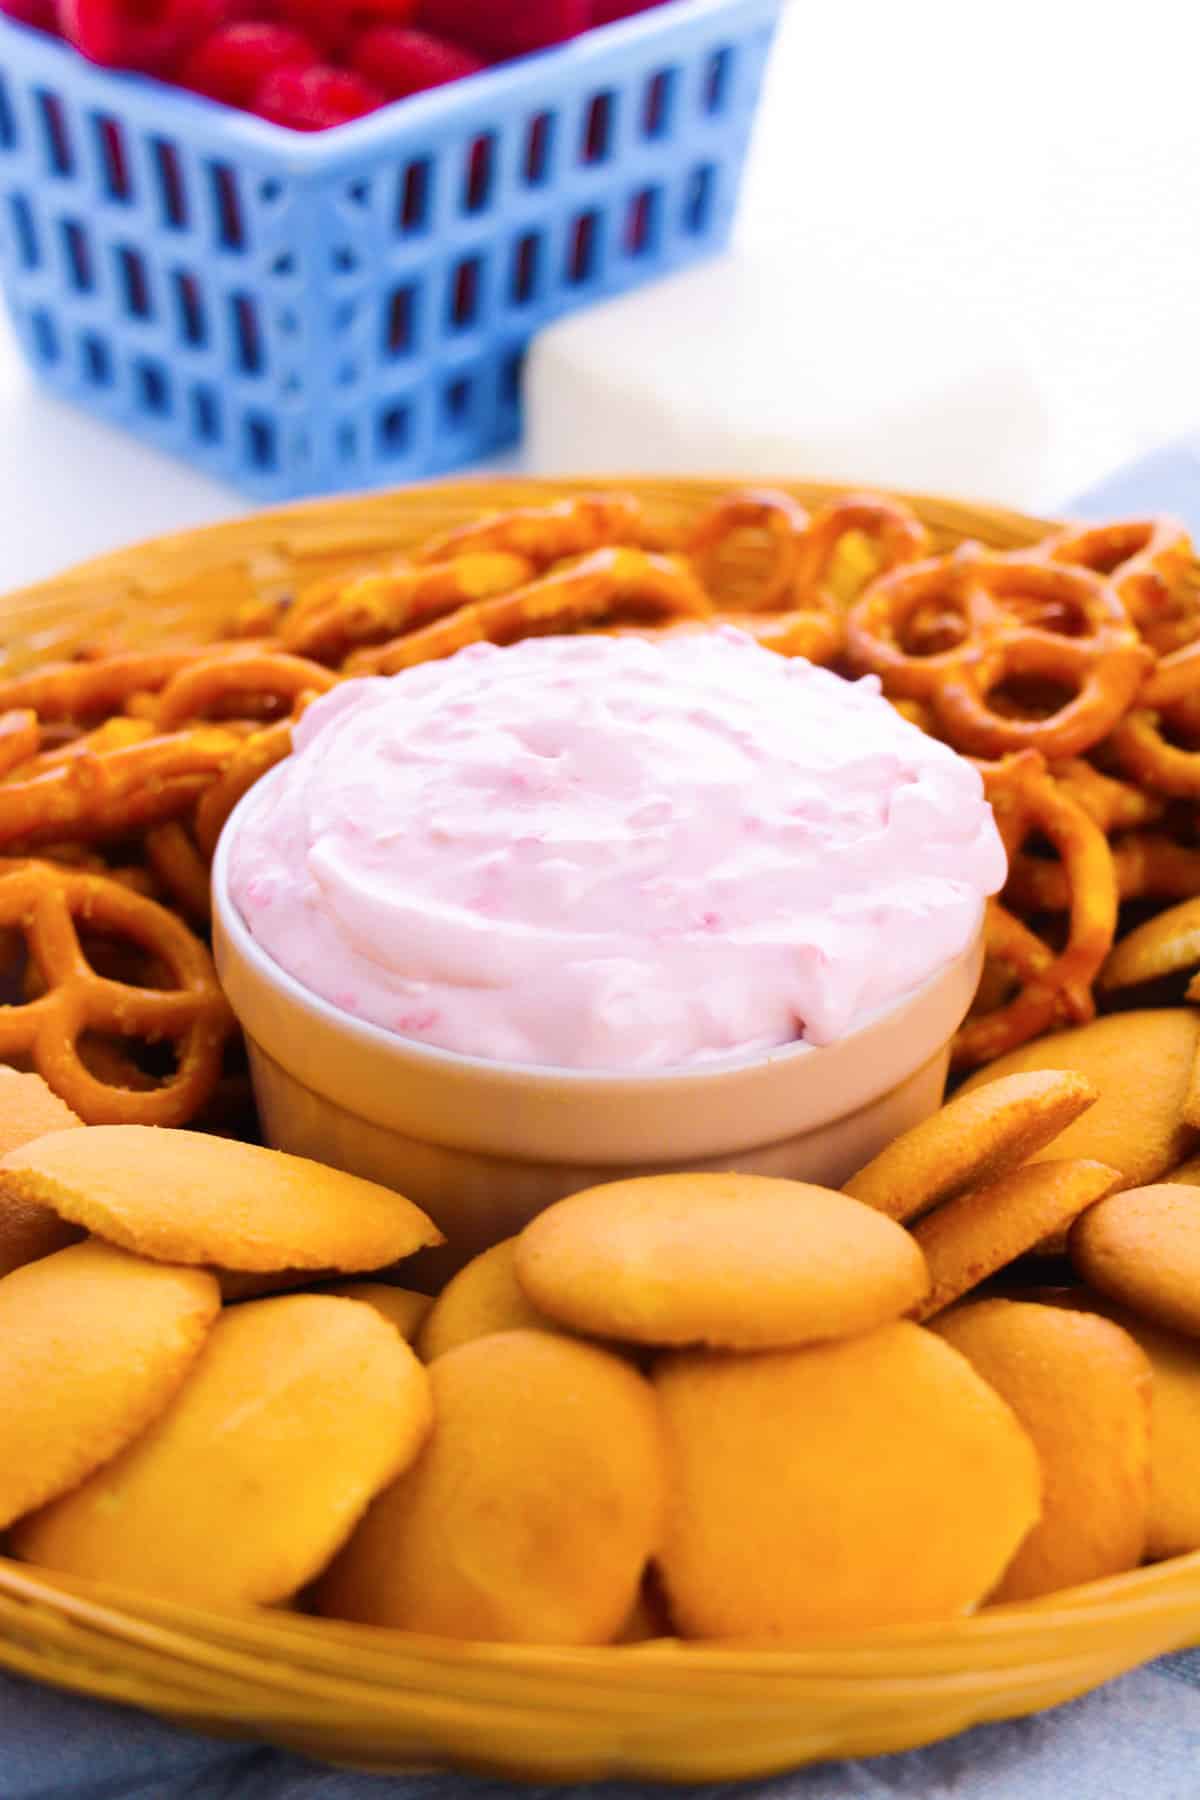 Raspberry cheesecake dip on a serving platter surrounded by nilla wafers and pretzels for dipping.